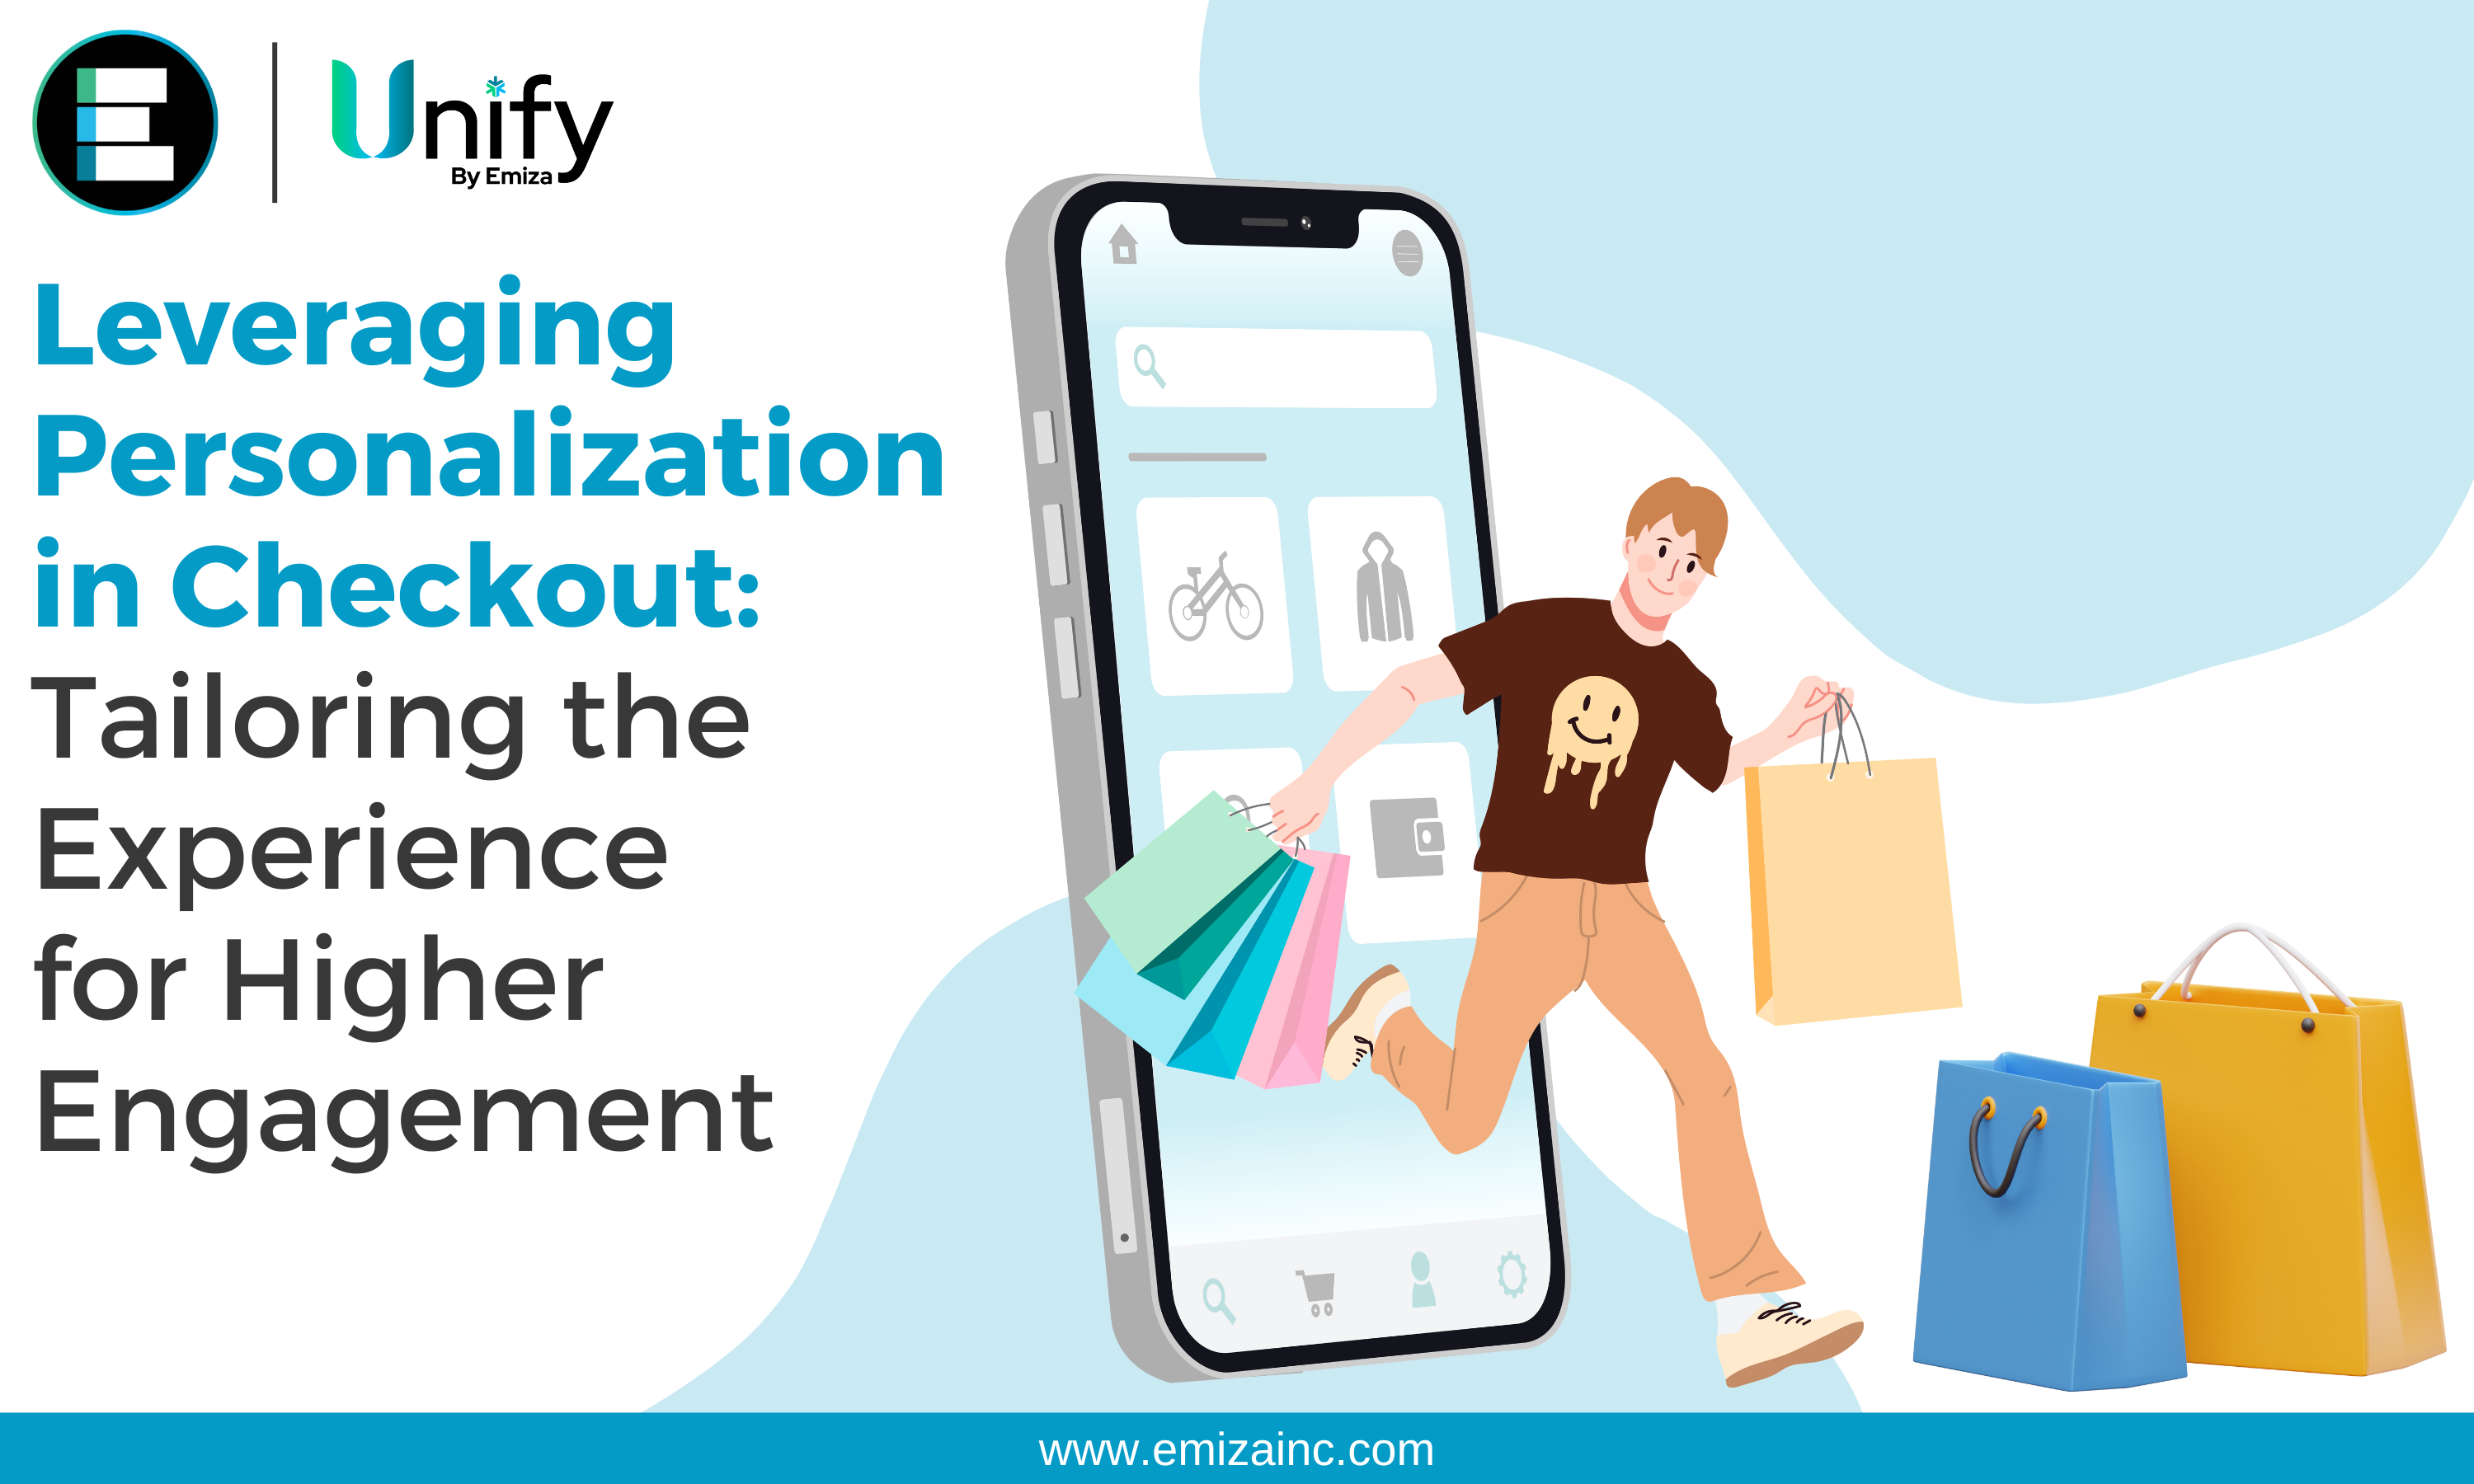 Leveraging Personalization in Checkout